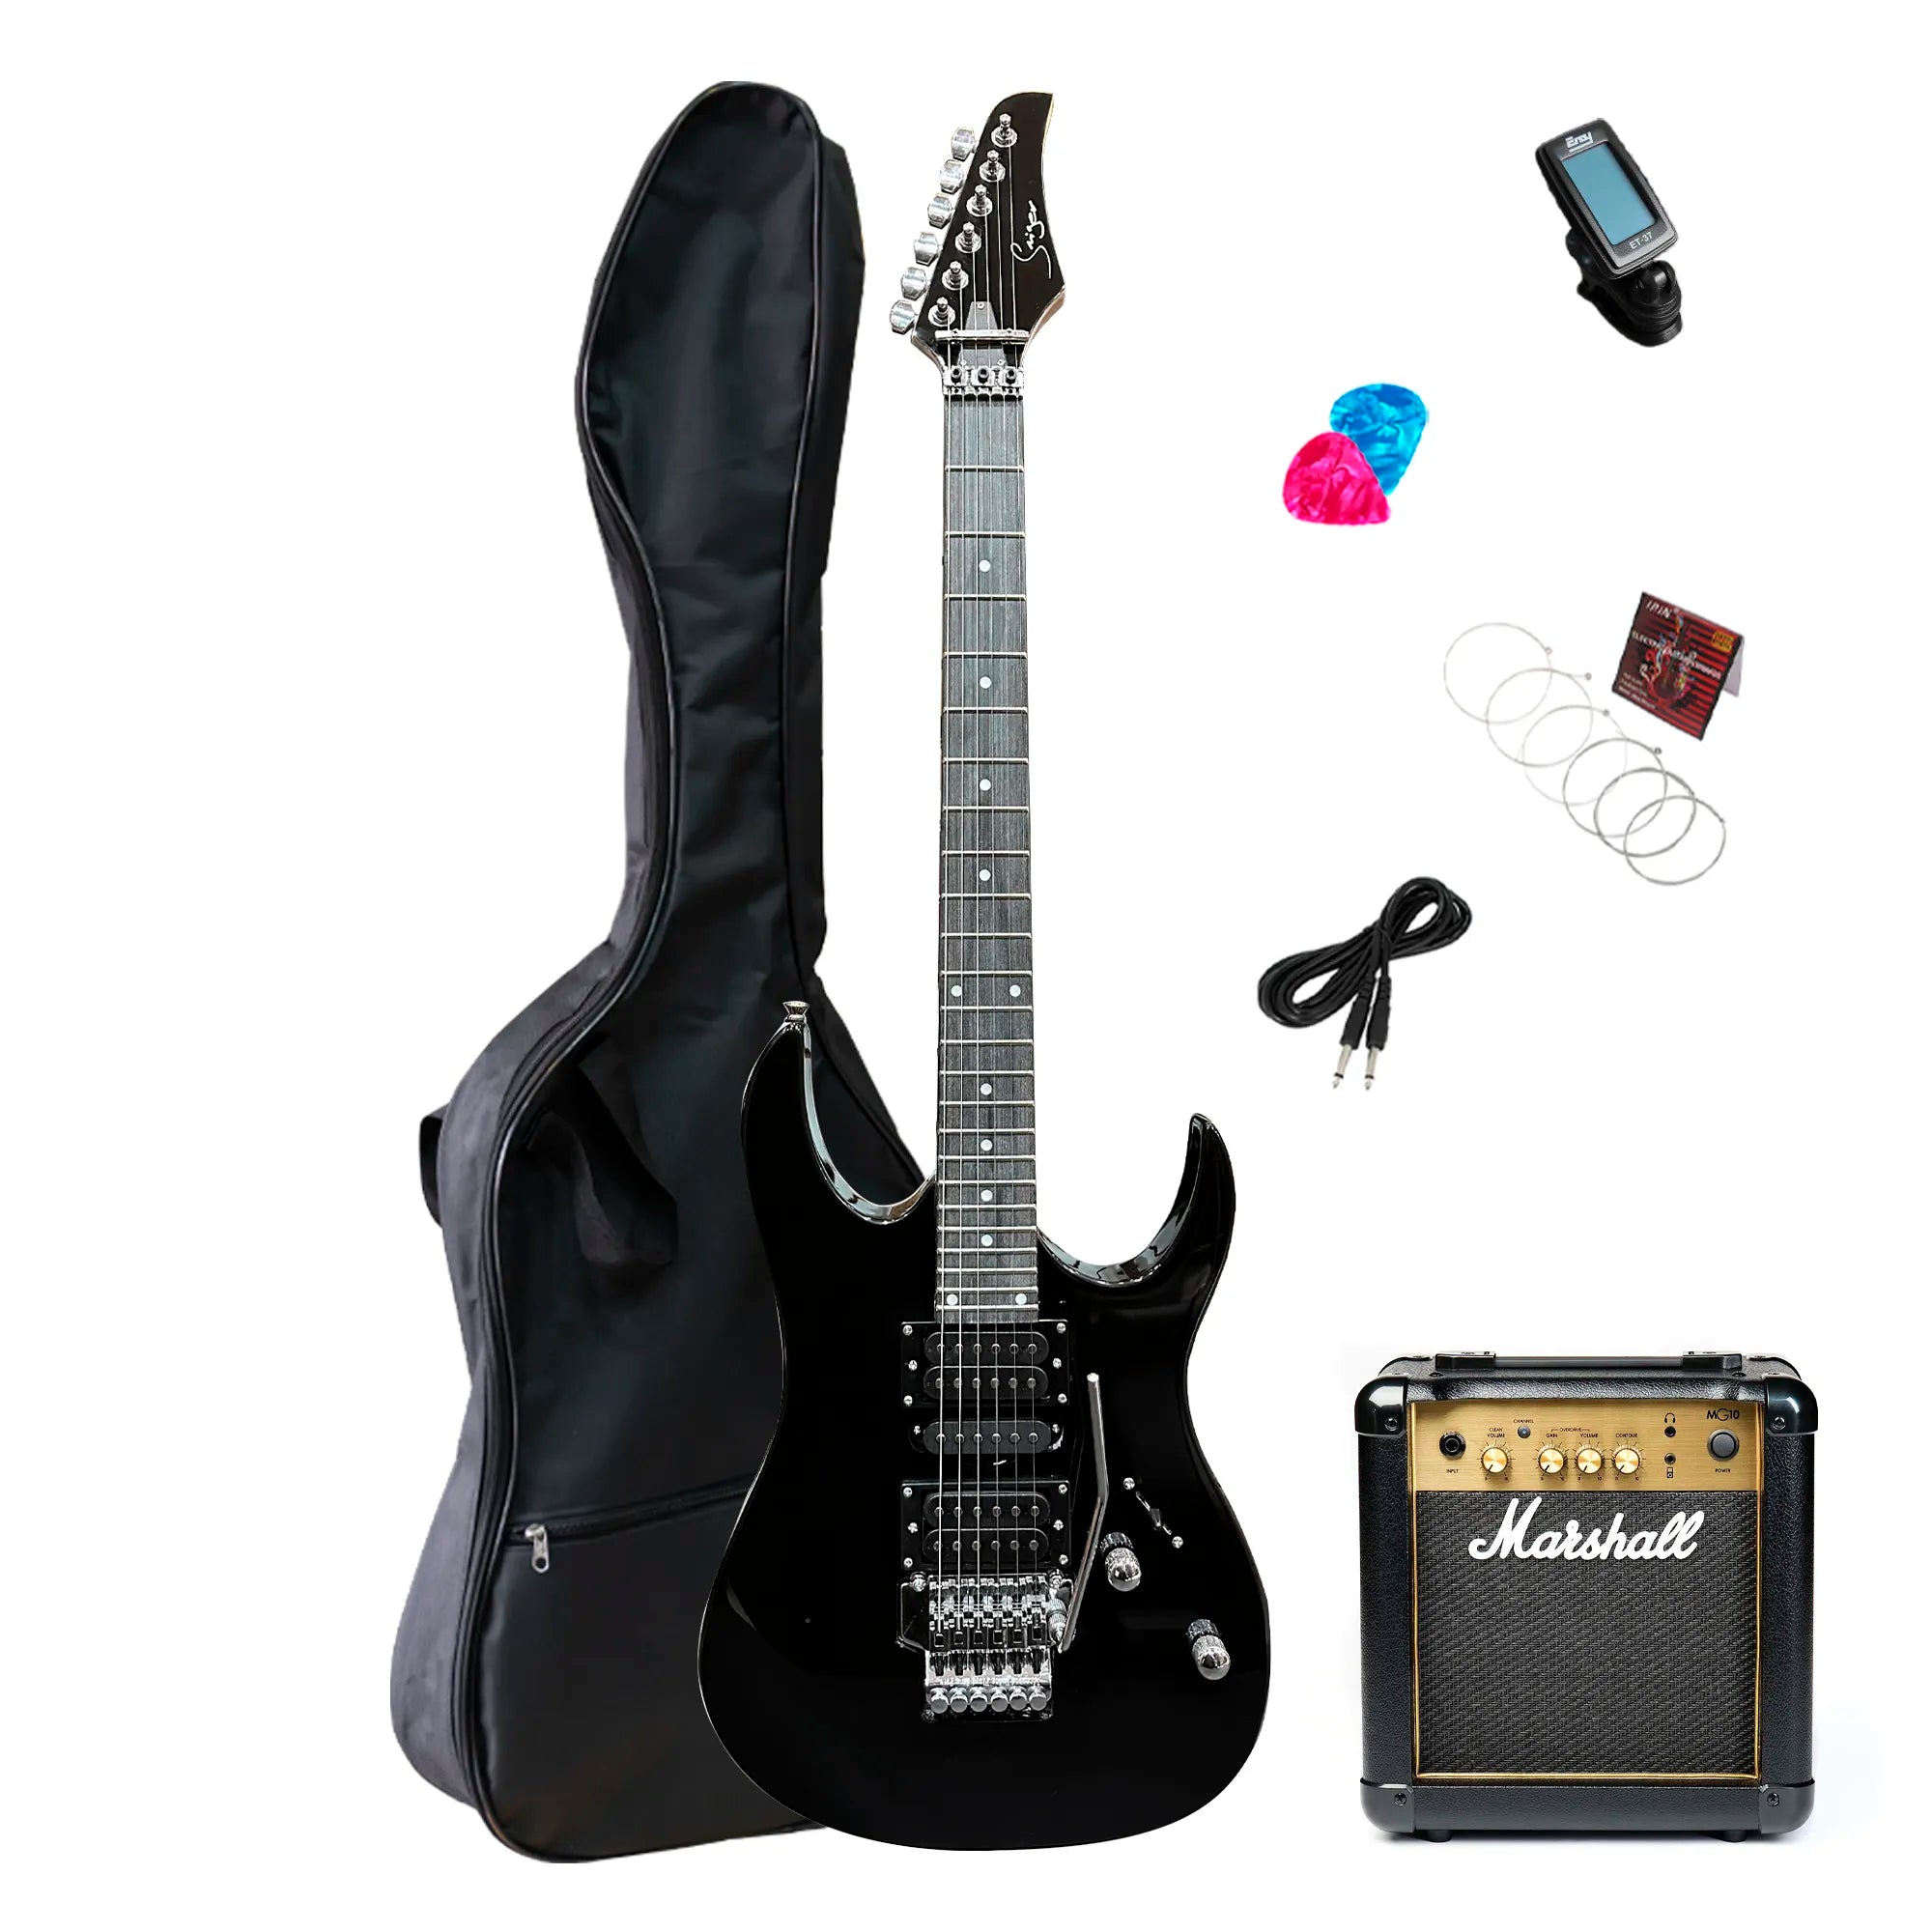 Pack Guitarra Electrica Smiger S-G5 con amplificador Marshall MG10